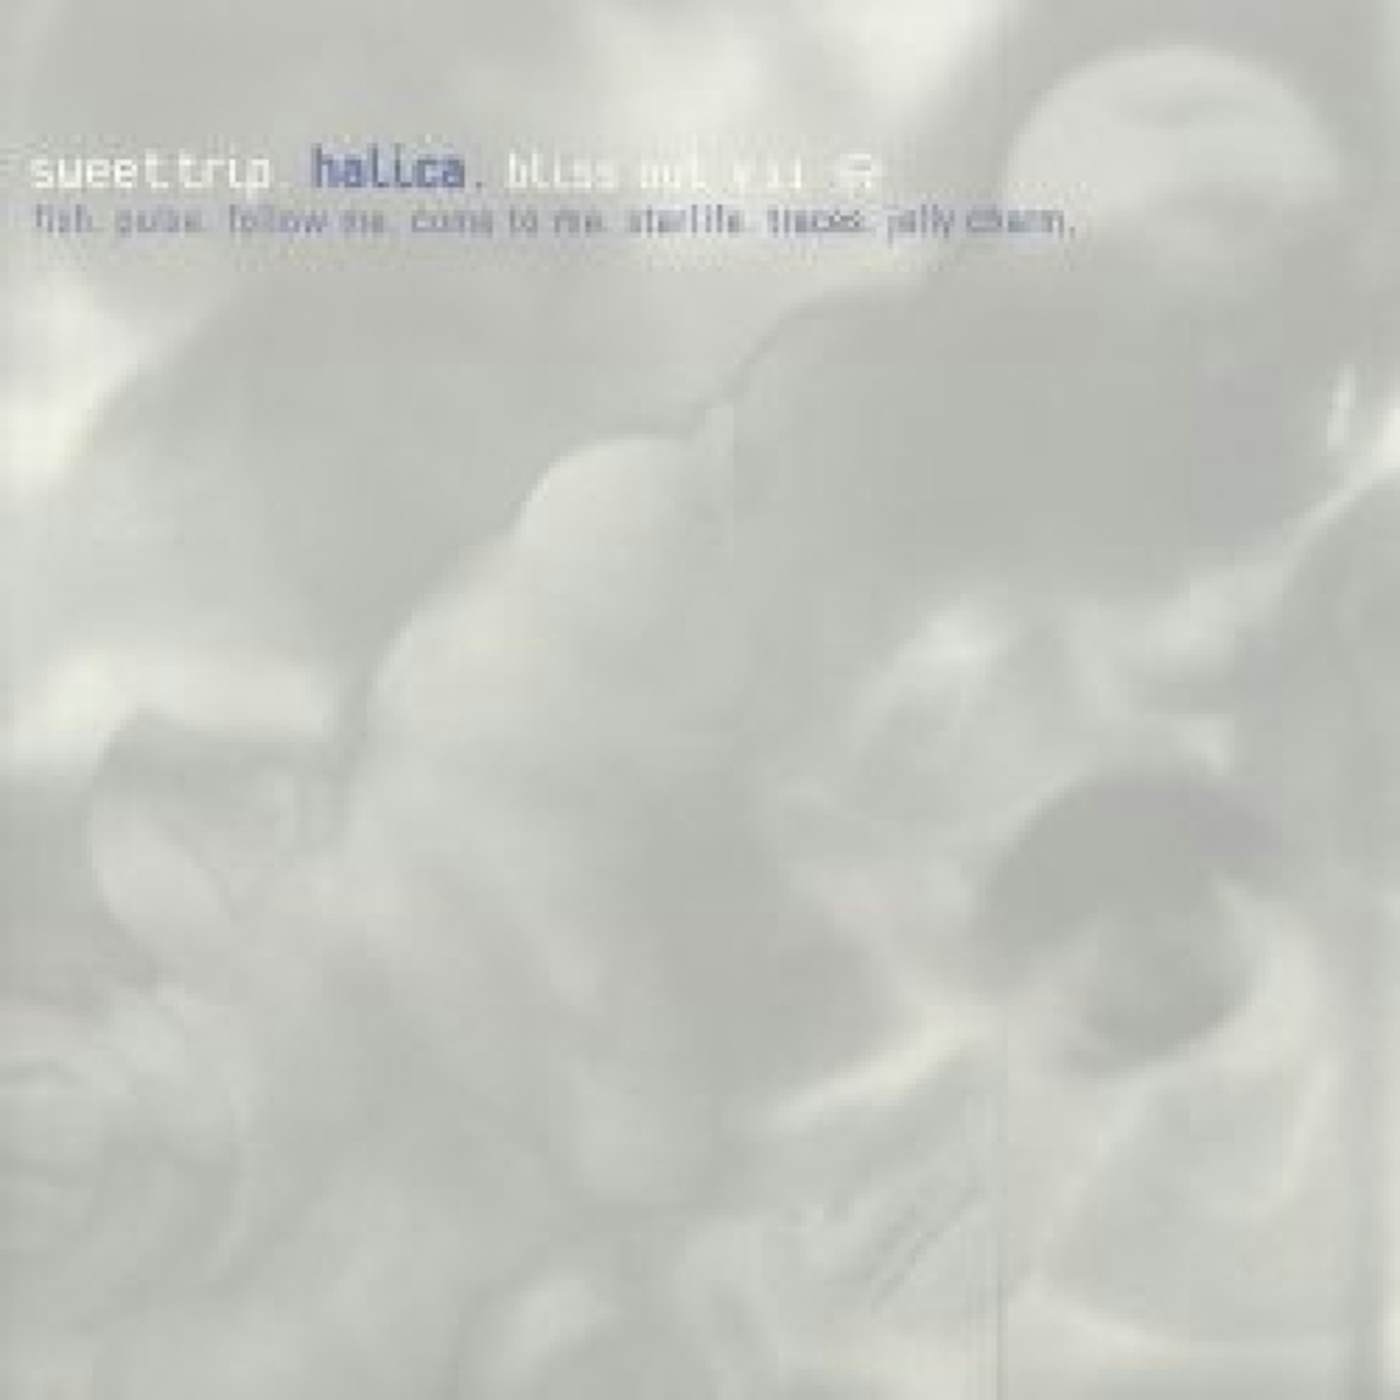 Sweet Trip HALICA: BLISS OUT 11 Vinyl Record